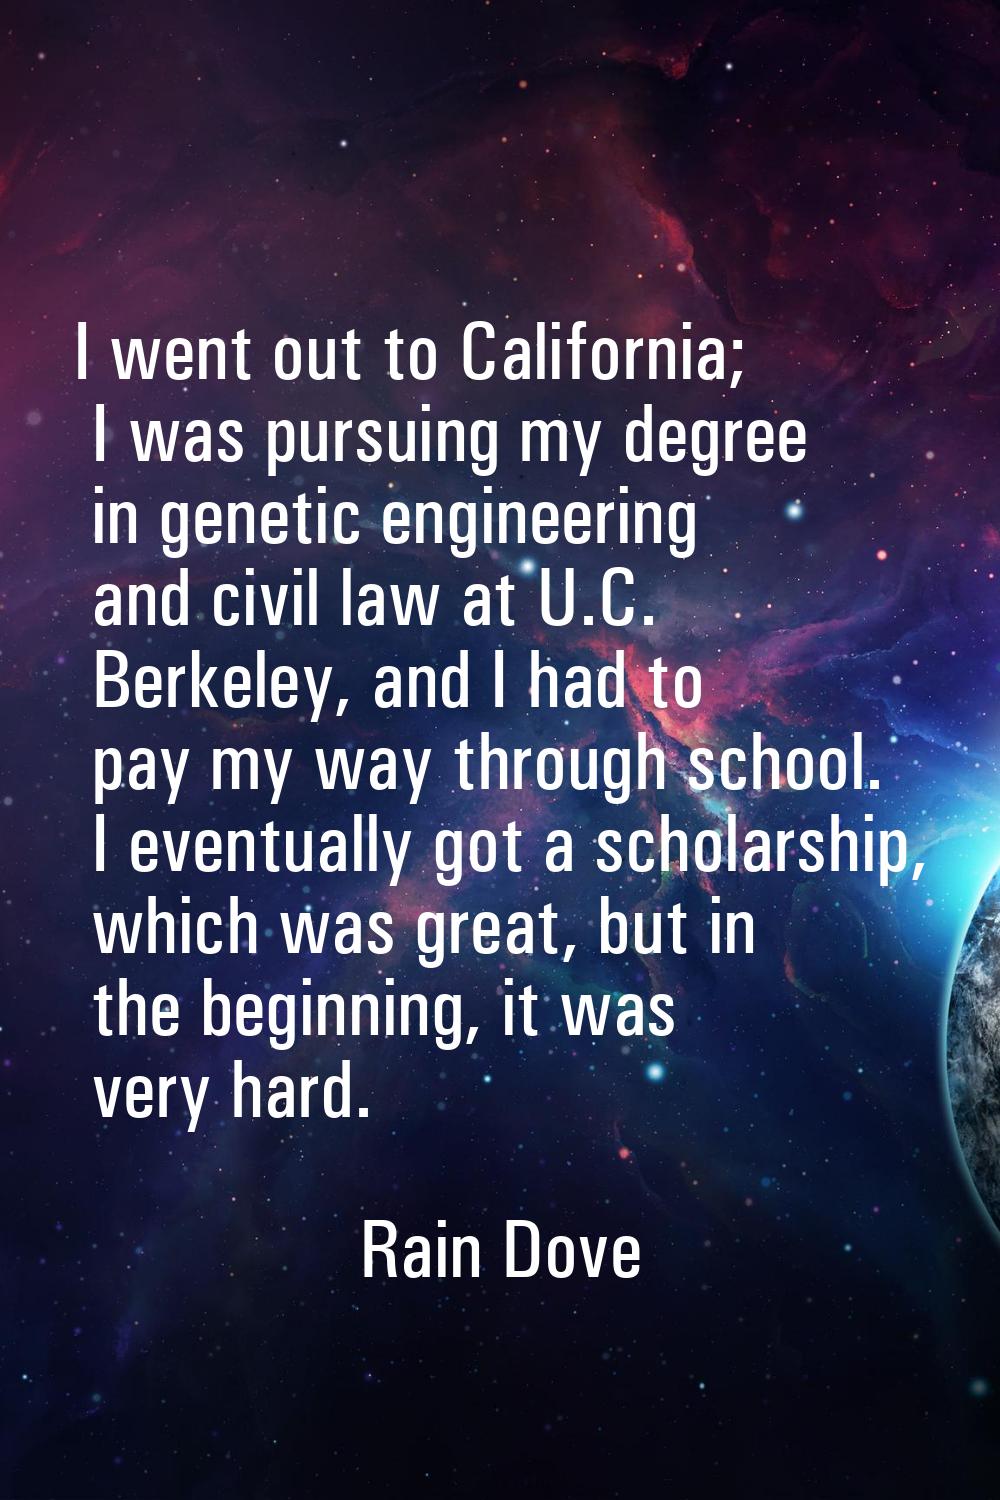 I went out to California; I was pursuing my degree in genetic engineering and civil law at U.C. Ber